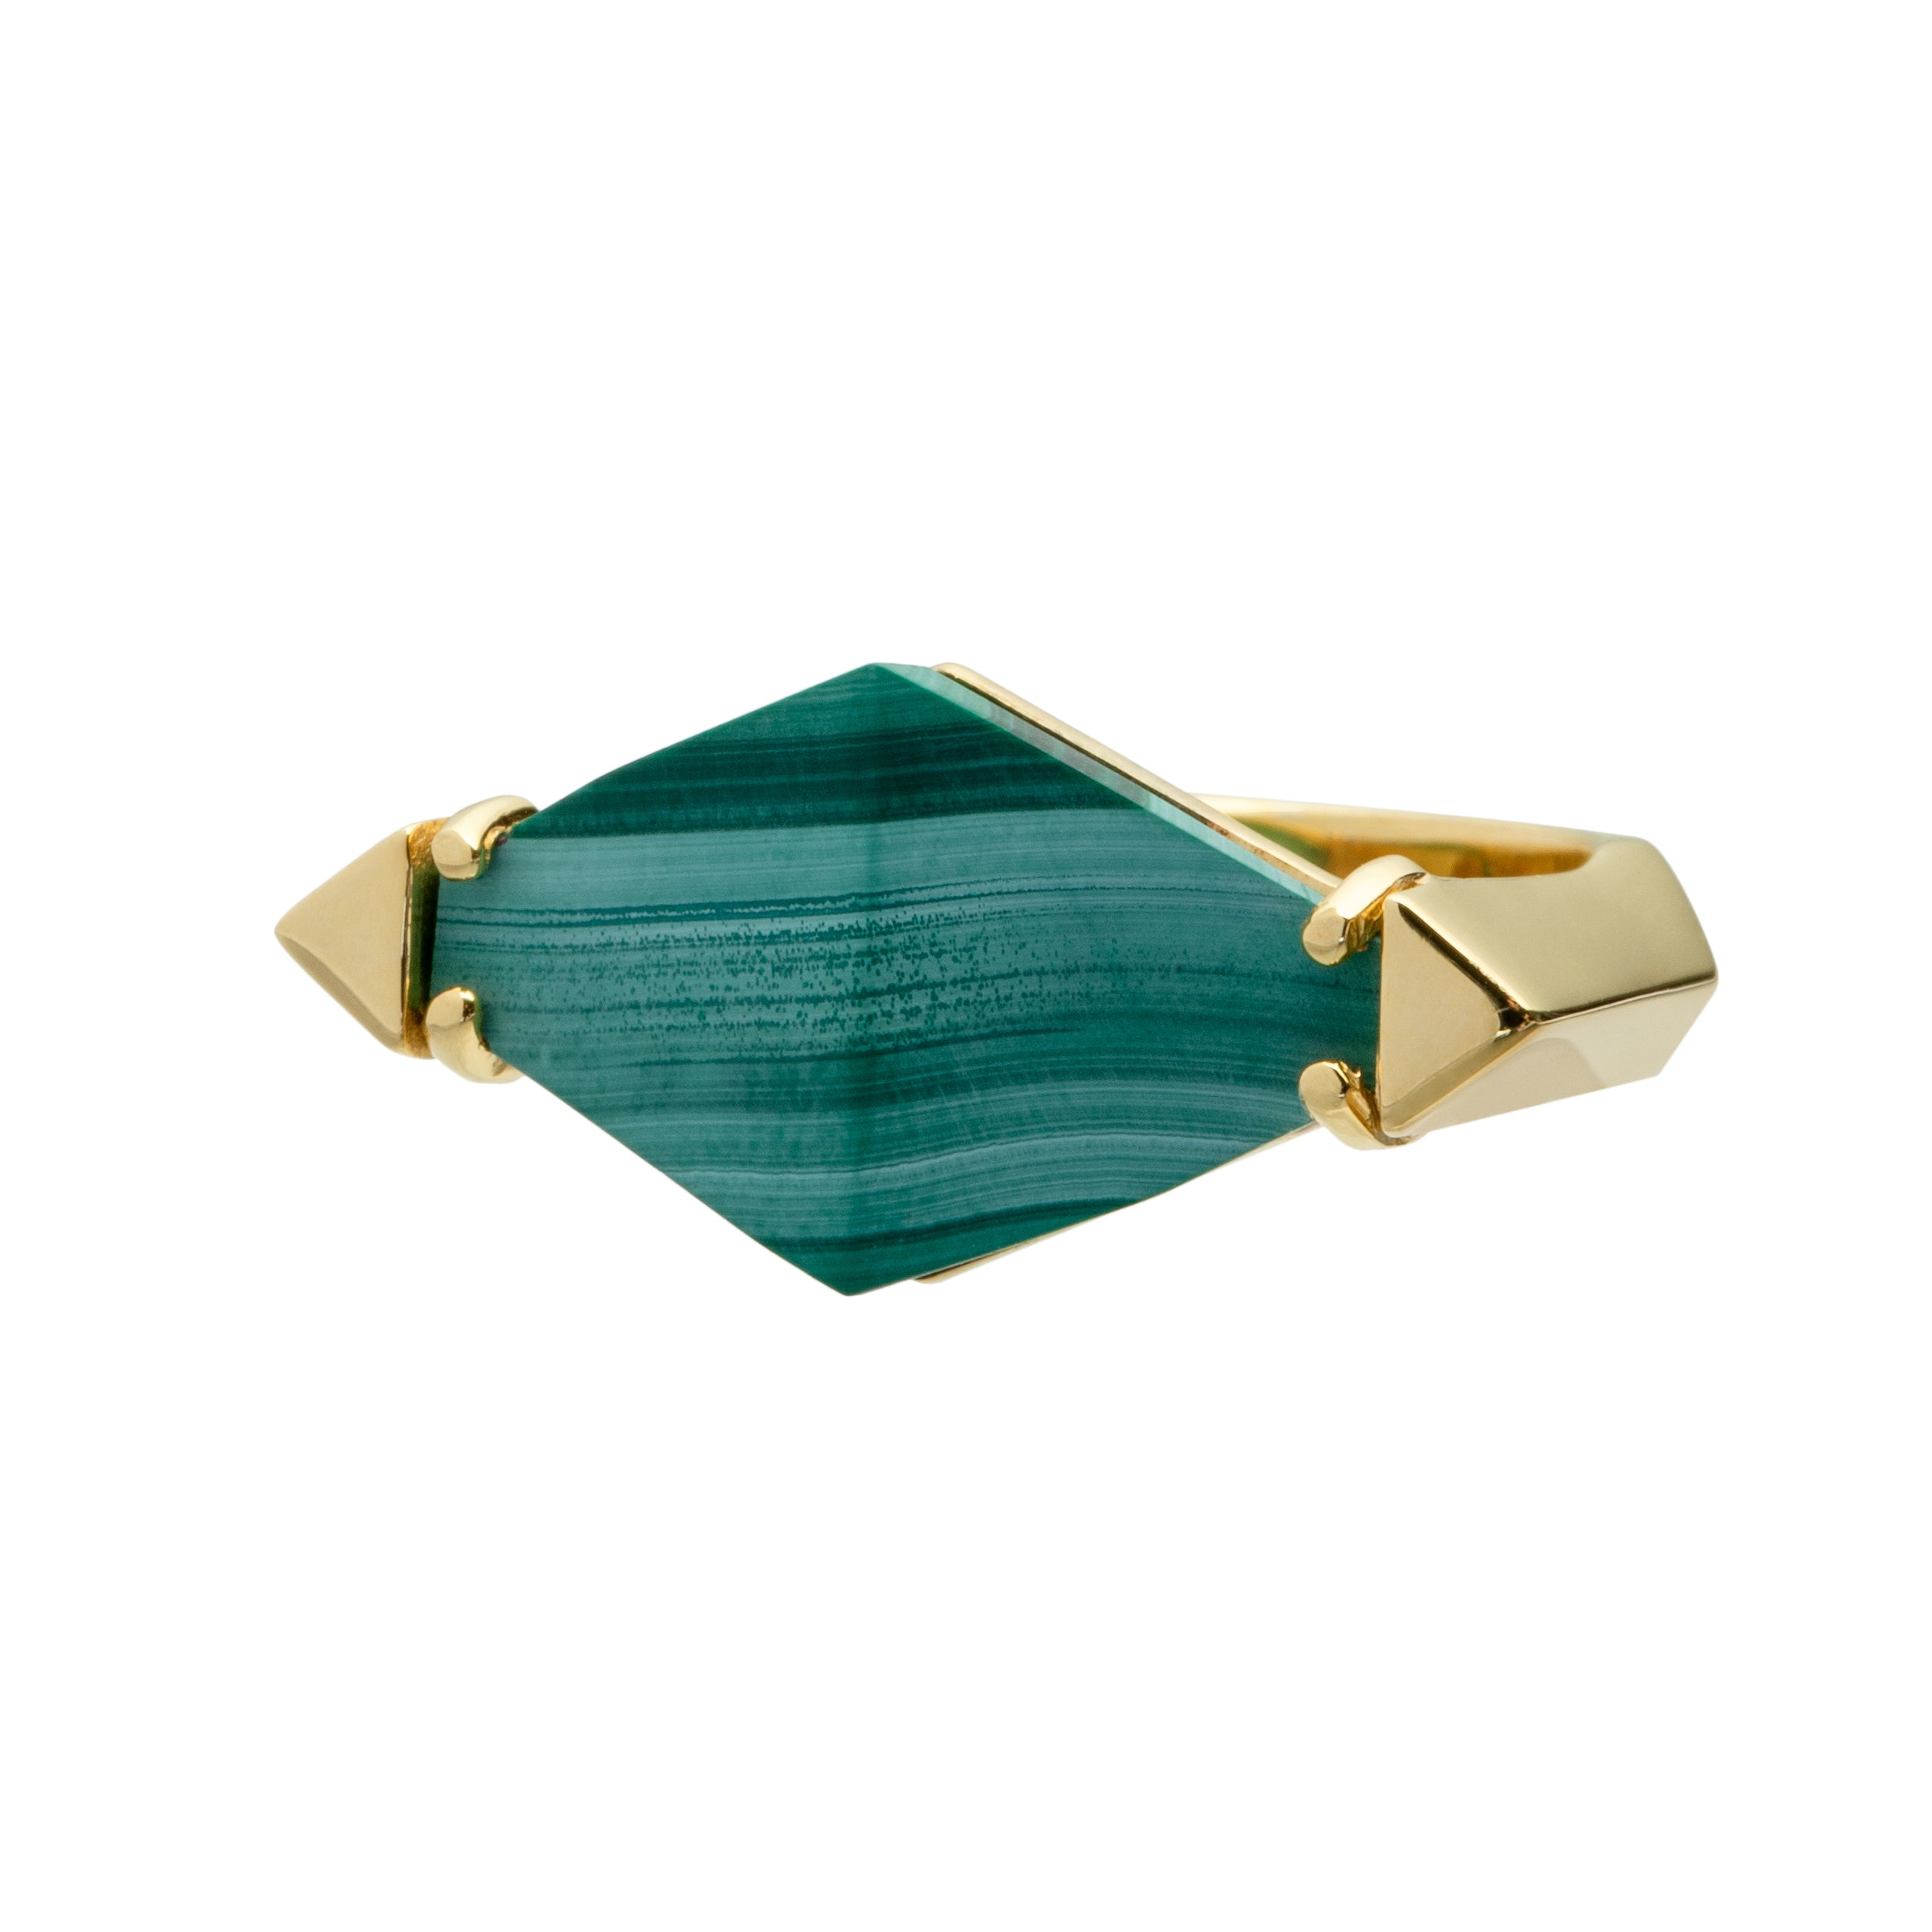 Gold ring with malchite stone front view